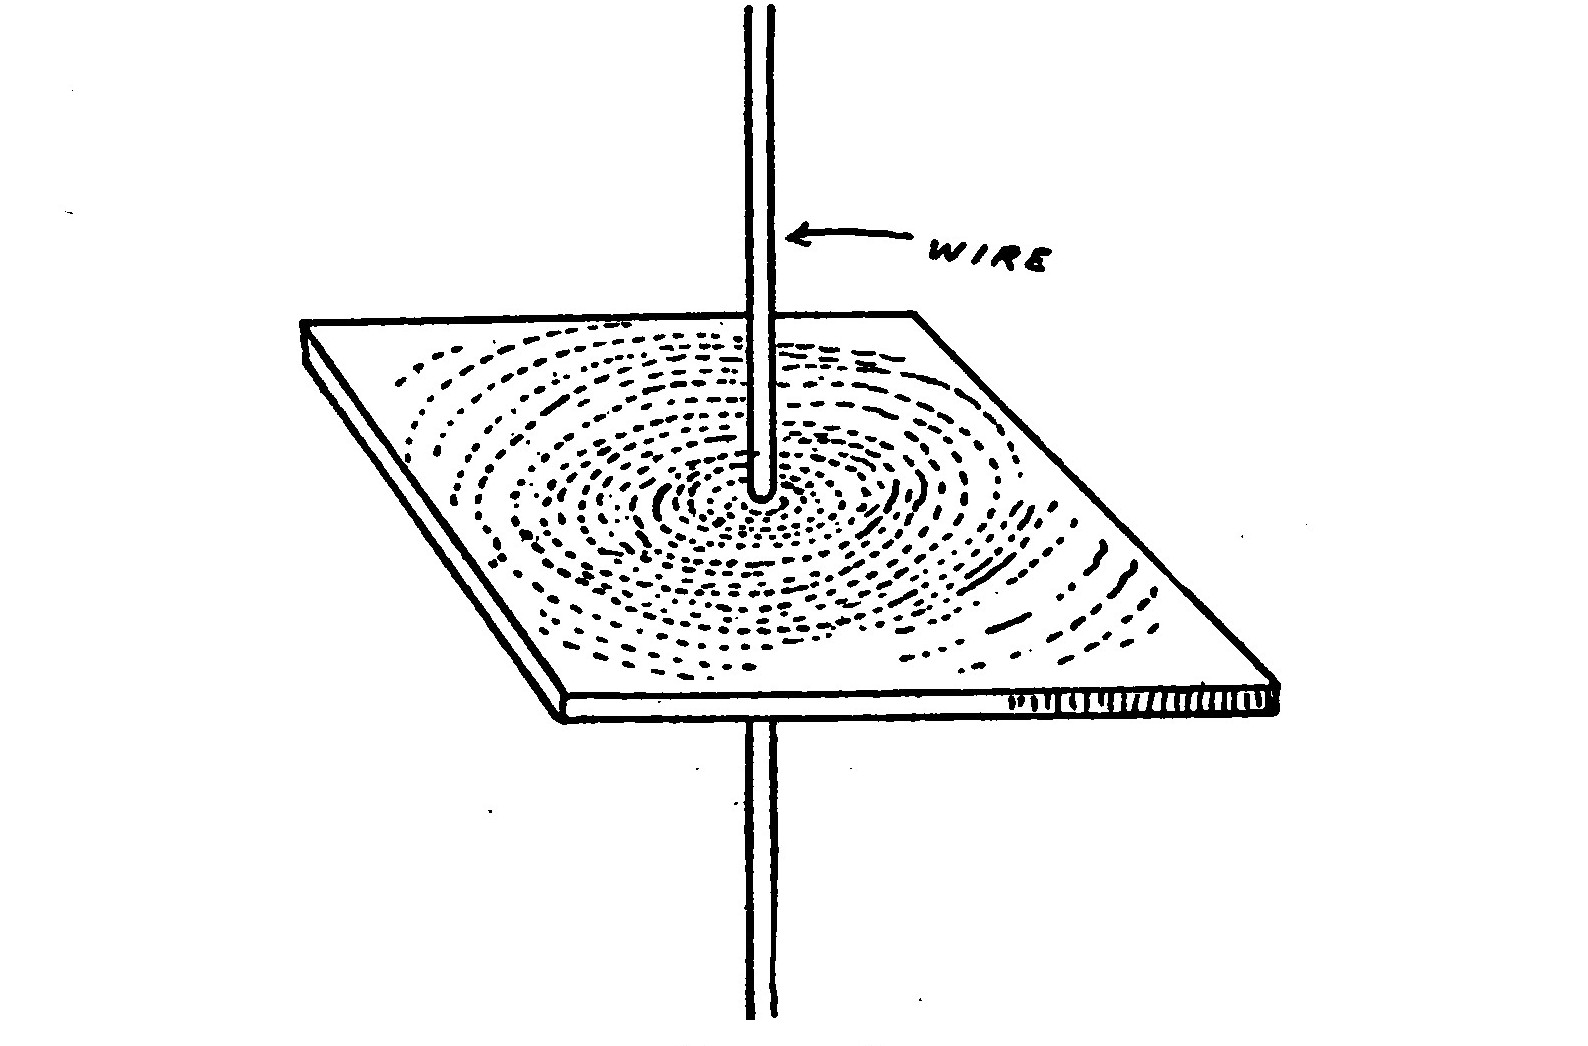 FIG. 13. Magnetic Phantom about a Wire Carrying Current.